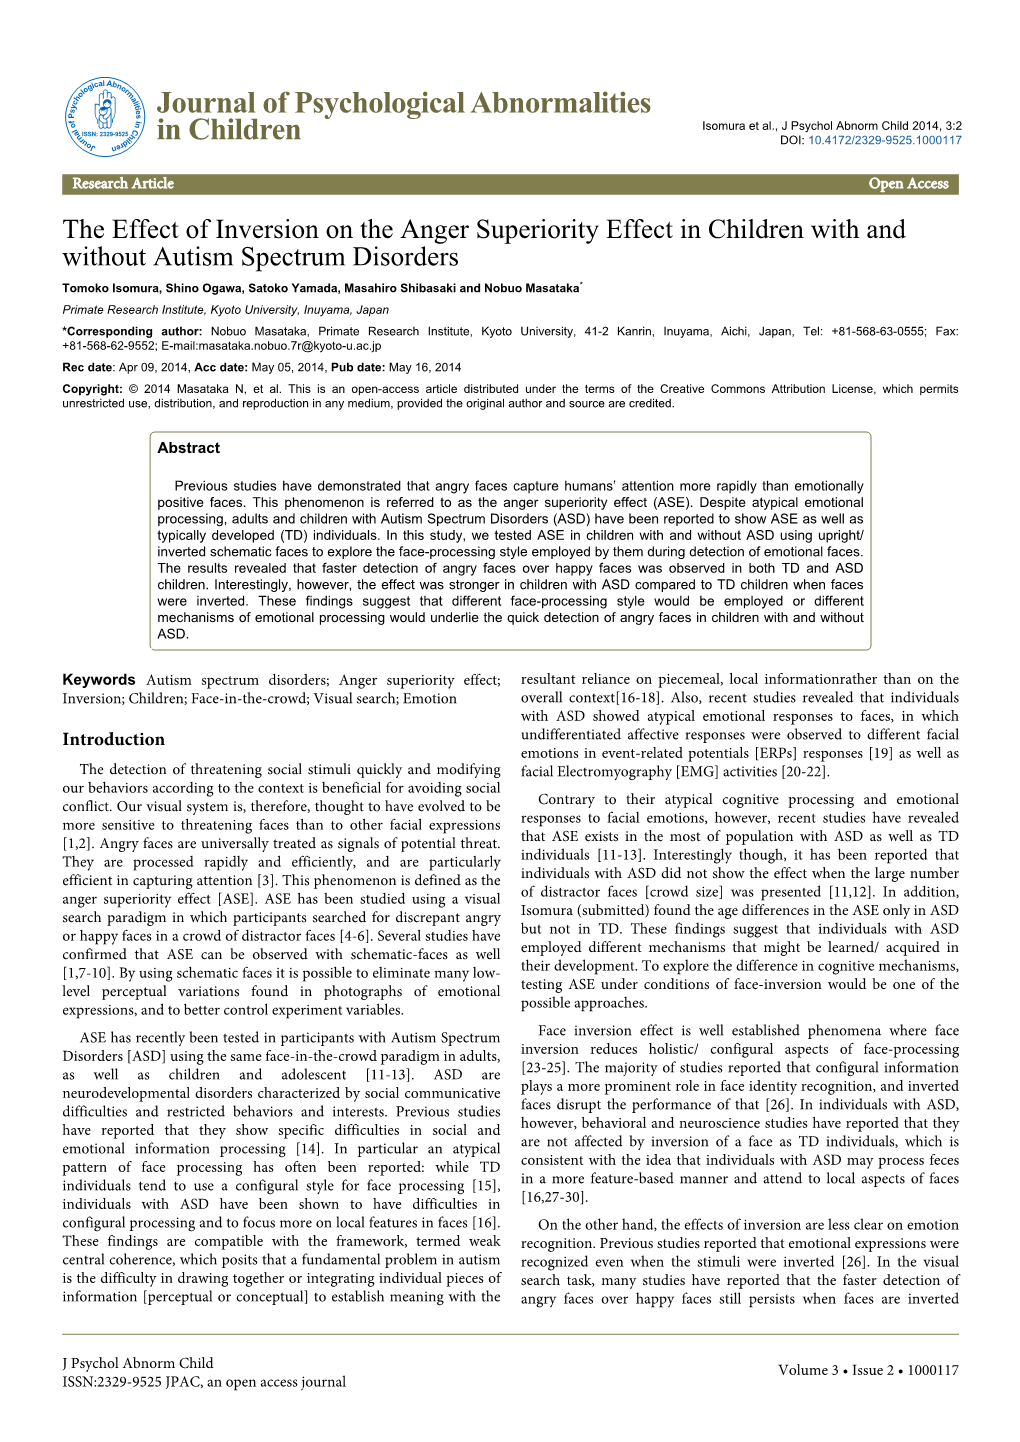 The Effect of Inversion on the Anger Superiority Effect in Children With